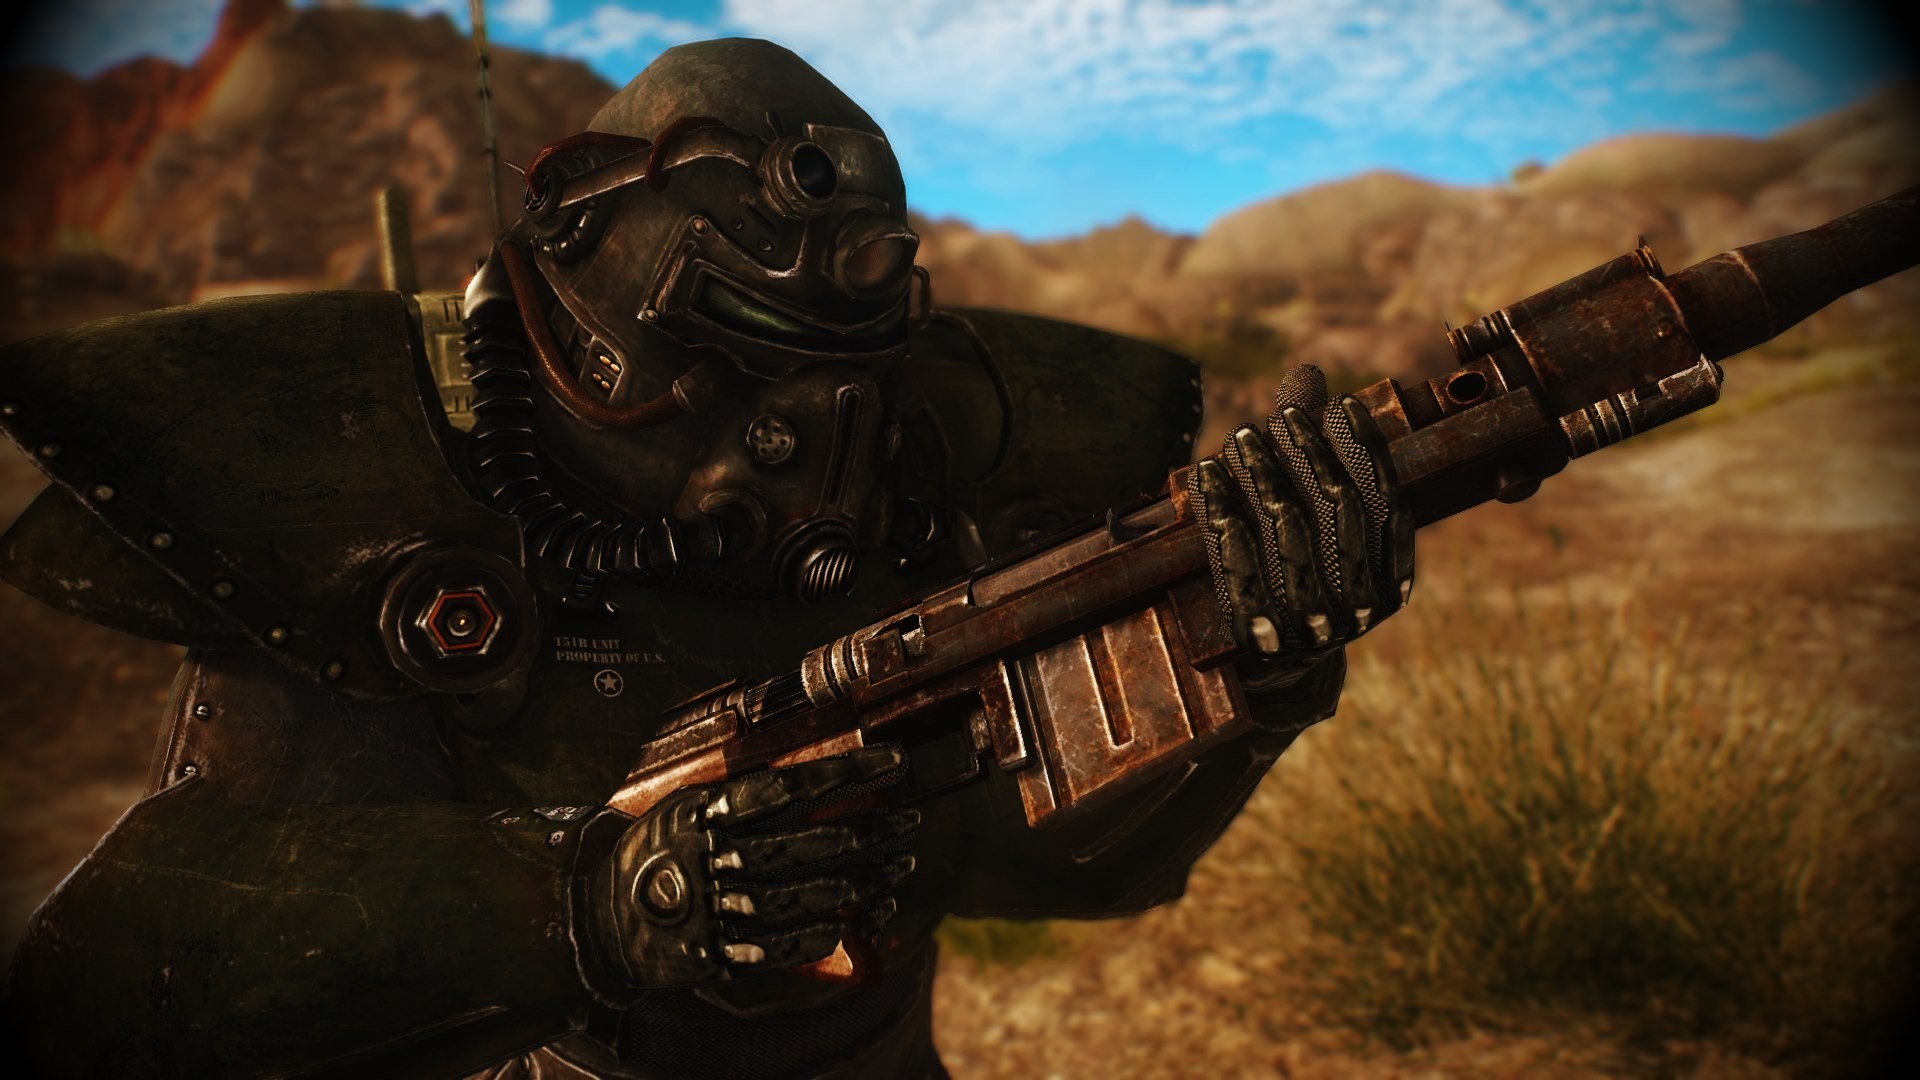 1920x1080 fallout new vegas wallpaper pack hd by Gregson Birds